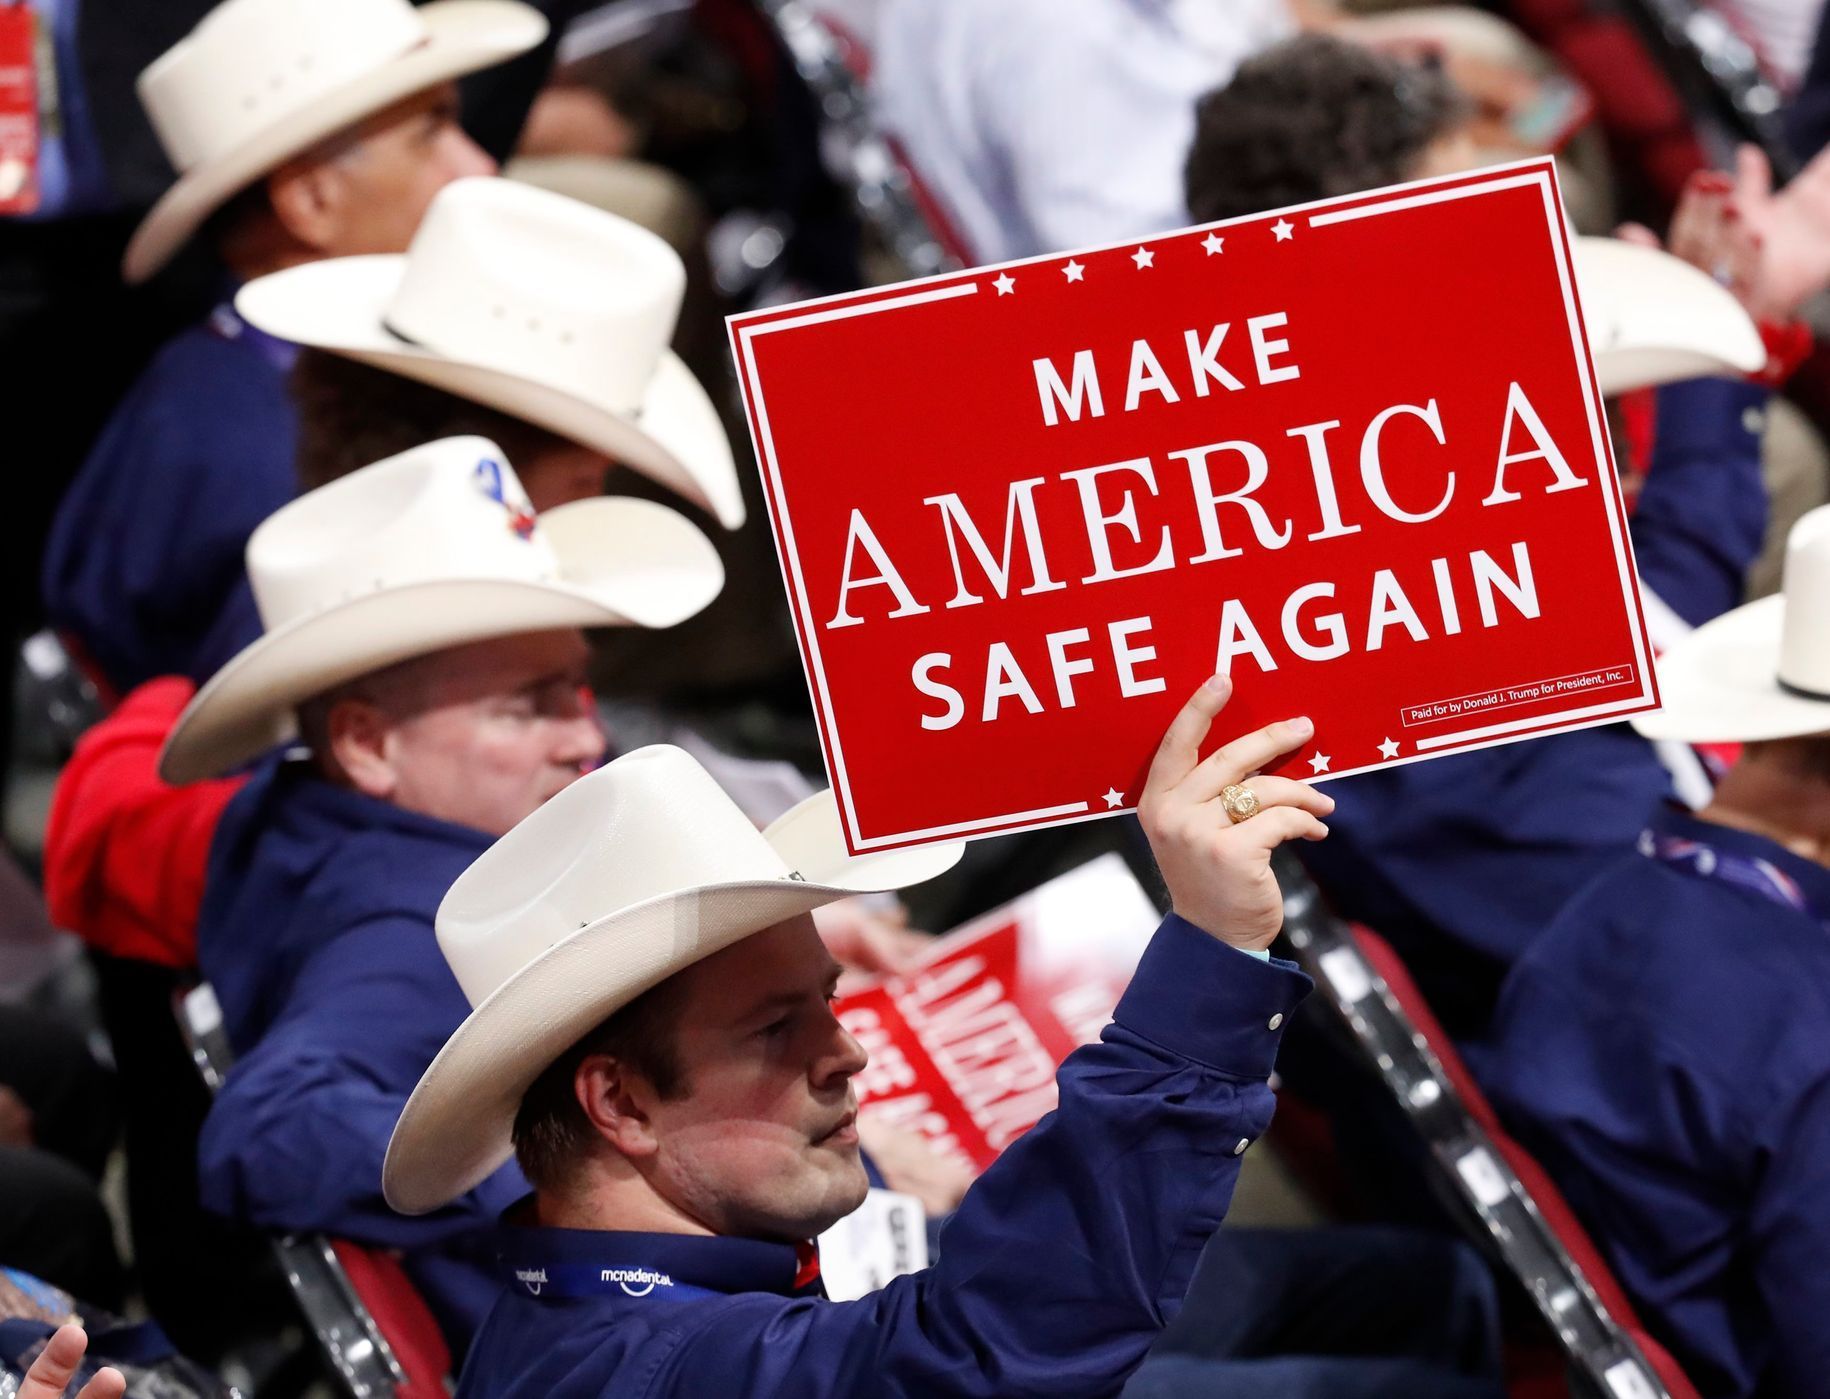 A delegate from Texas holds up a sign at the Republican National Convention in Cleveland